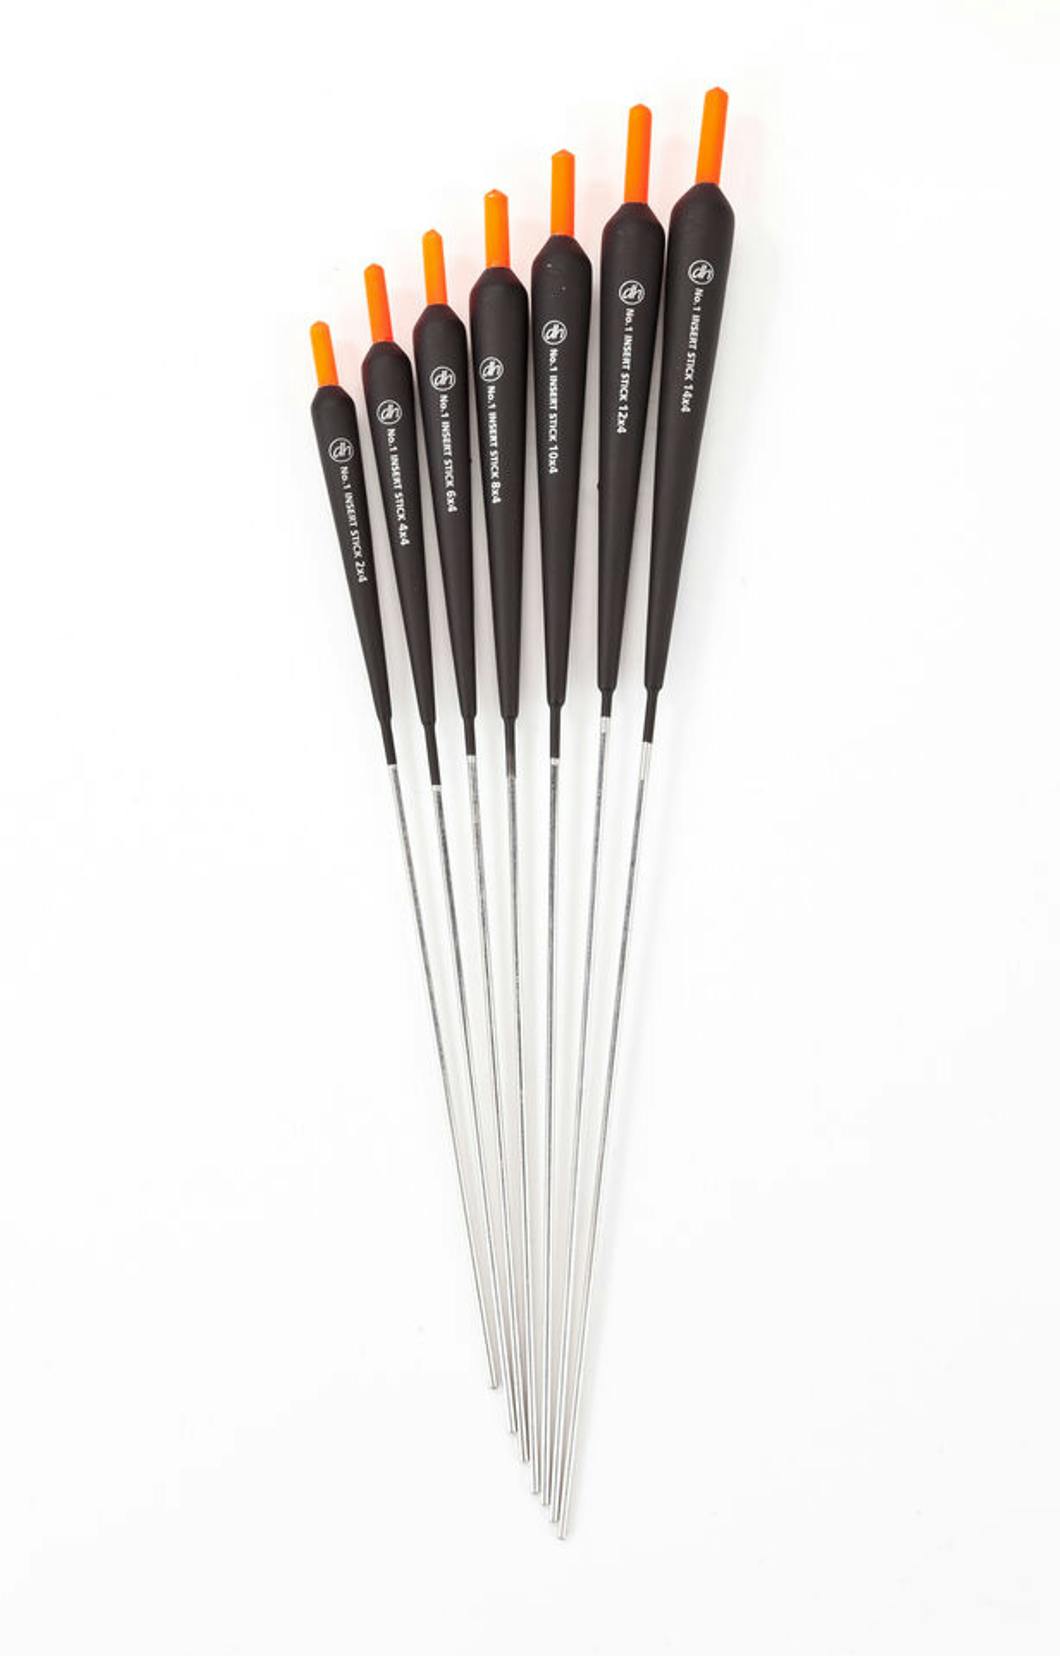 Premier Floats 5 x Shouldered Stick Floats ALL SIZES Fishing tackle 